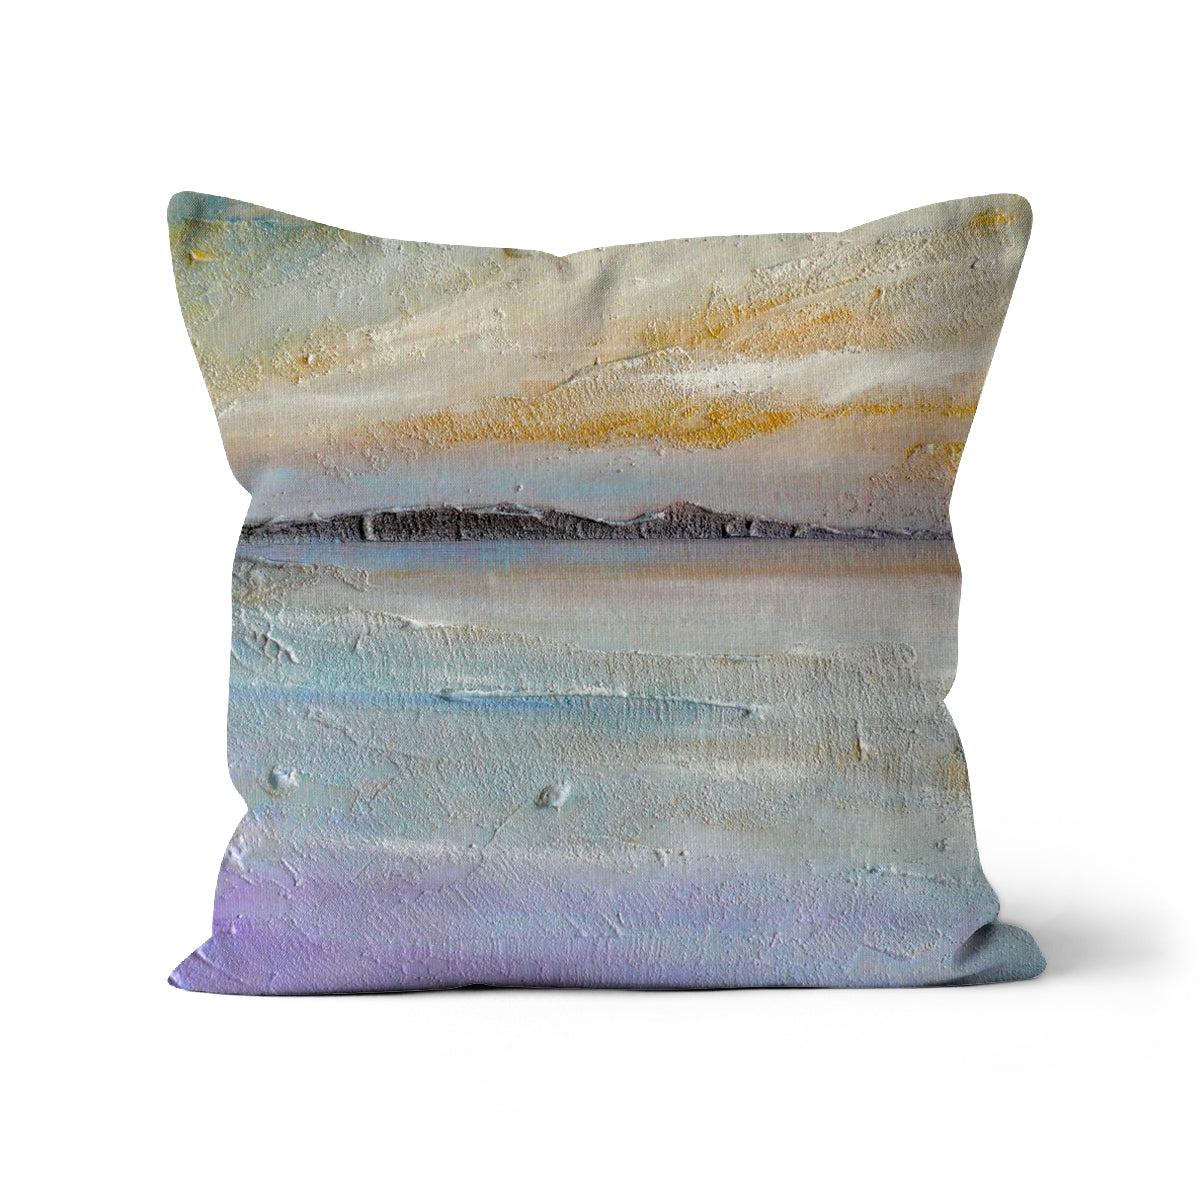 Sollas Beach South Uist Art Gifts Cushion-Cushions-Hebridean Islands Art Gallery-Faux Suede-16"x16"-Paintings, Prints, Homeware, Art Gifts From Scotland By Scottish Artist Kevin Hunter